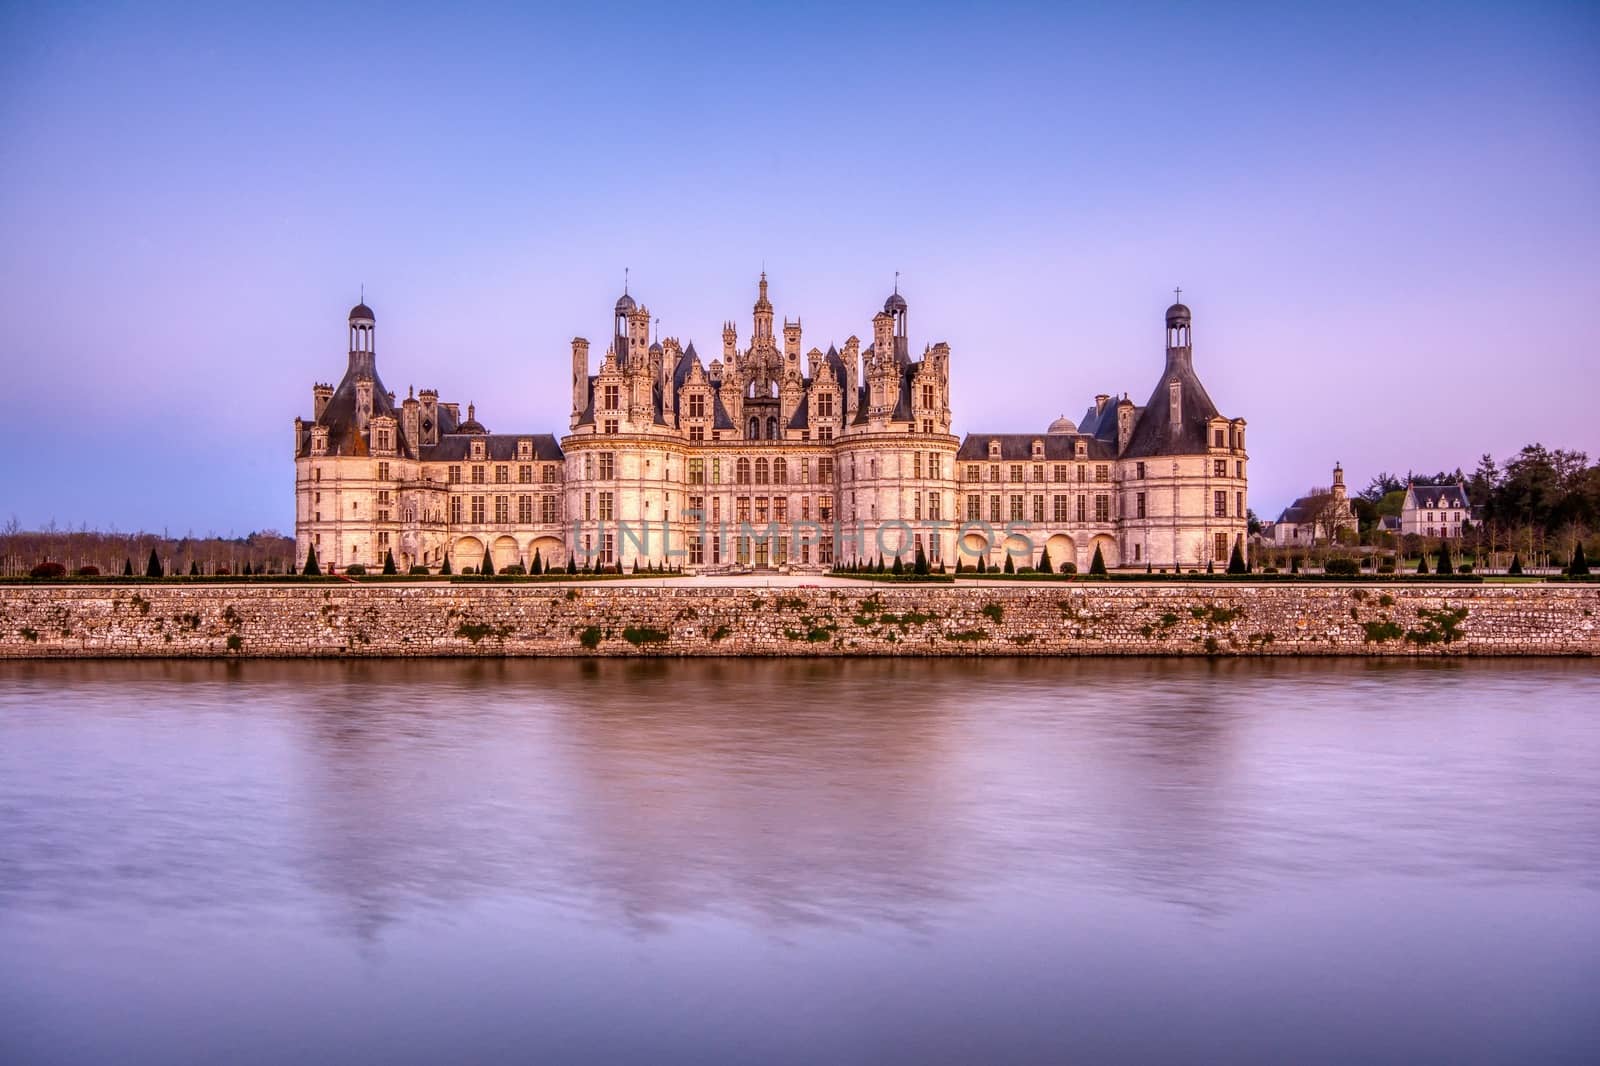 Loire, France - April 14, 2019: The castle of Chambord at sunset, Castle of the Loire, France. Chateau de Chambord, the largest castle in the Loire Valley. A UNESCO world heritage site in France